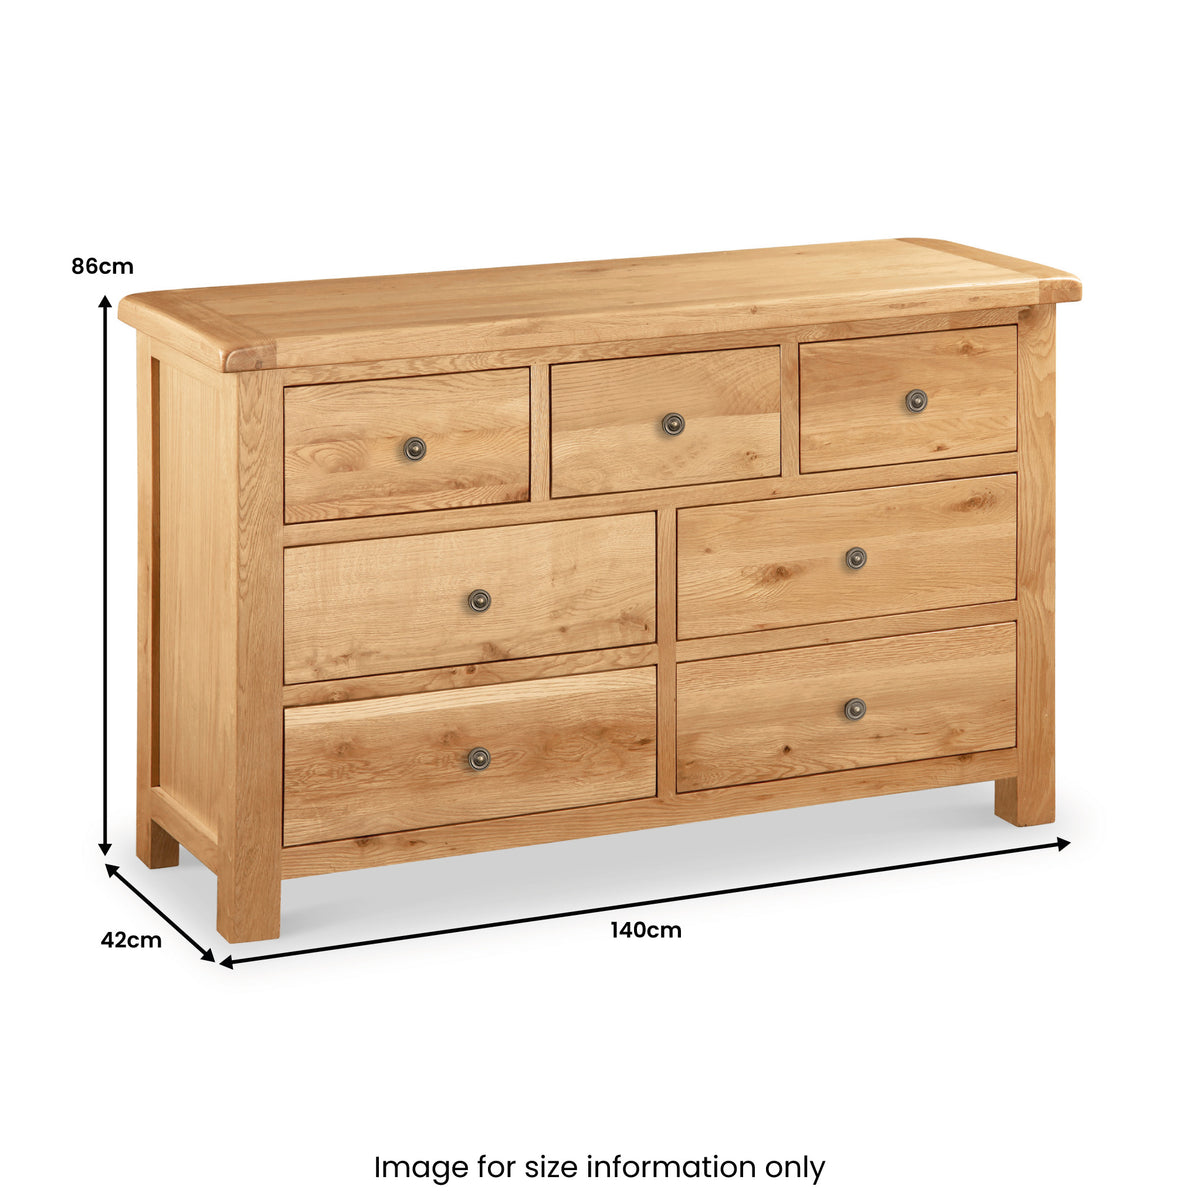 Sidmouth 3 over 4 Drawer Chest dimensions